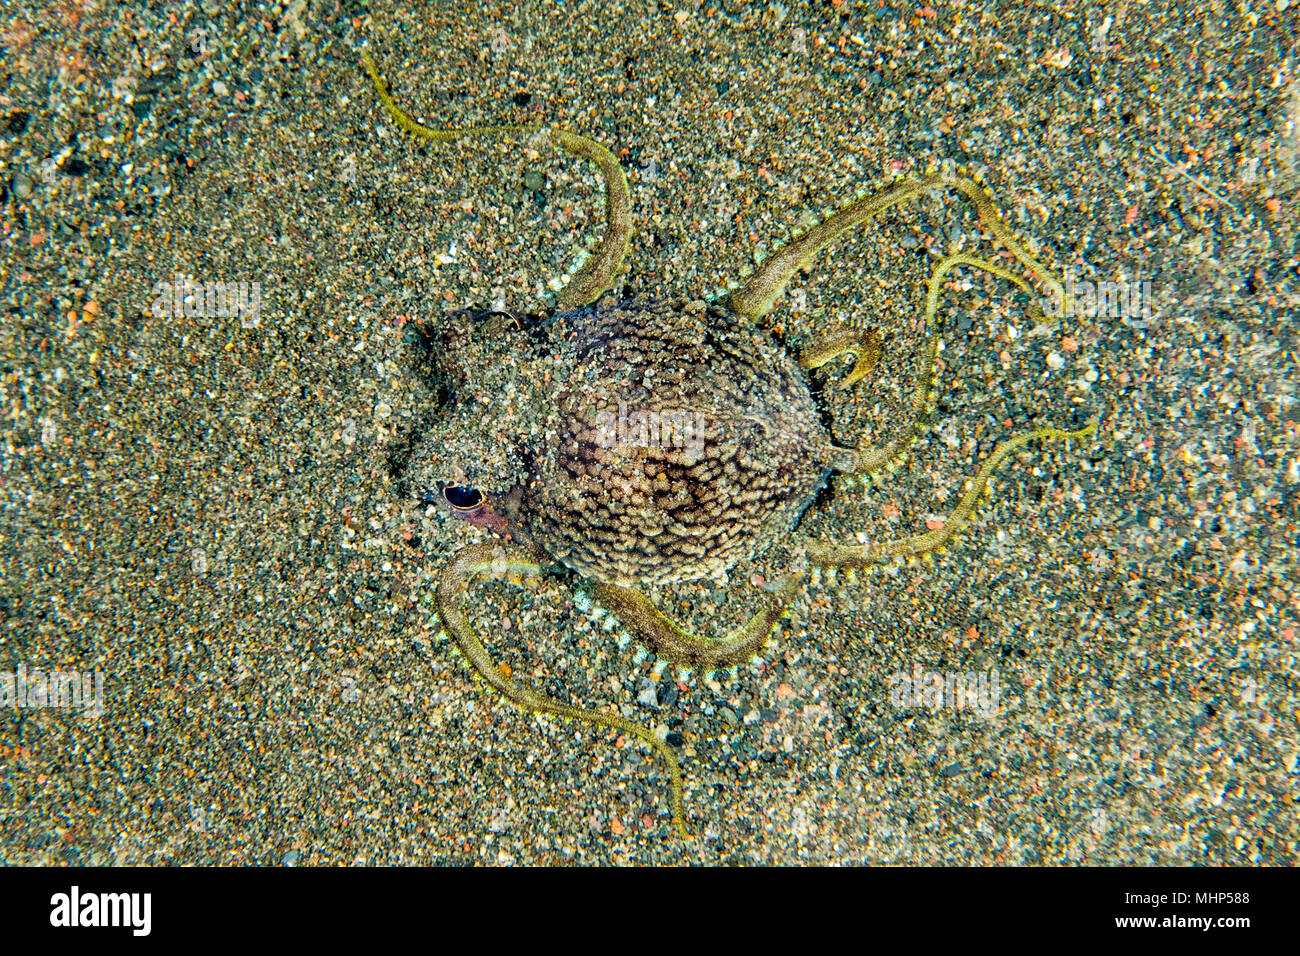 coconut octopus on sand background while diving in Indonesia Stock Photo